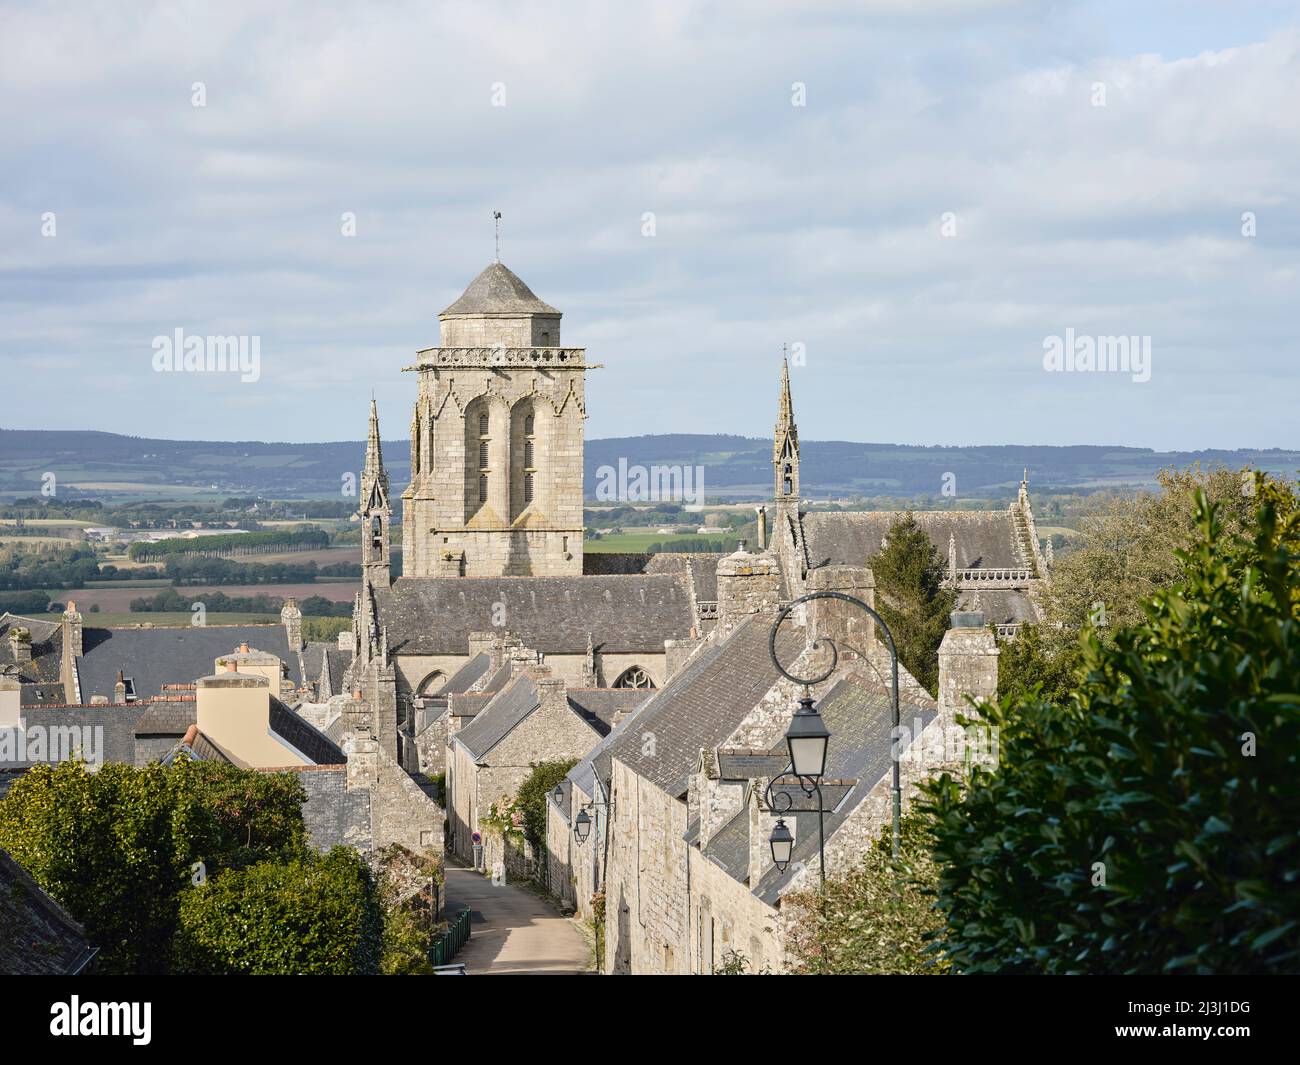 The tower of the Église Saint-Ronan in the village of Locronan in the department of Finistère in Brittany. The cottages were built of granite and date back to the 17th century. Locronan's historic setting has been featured in many film and television productions. Locronan is a popular destination for excursions. Stock Photo